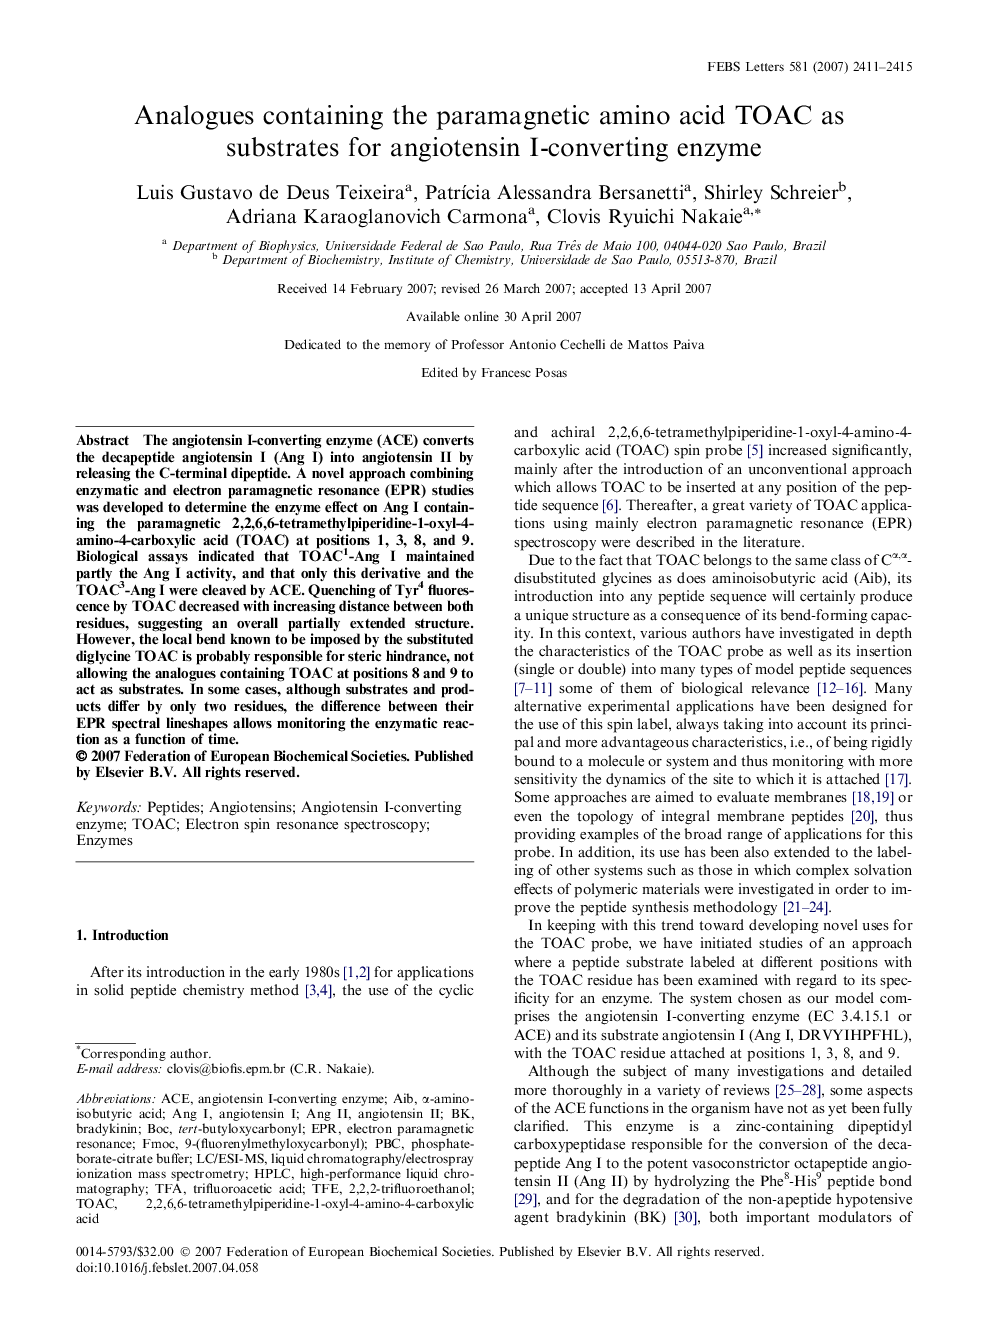 Analogues containing the paramagnetic amino acid TOAC as substrates for angiotensin I-converting enzyme